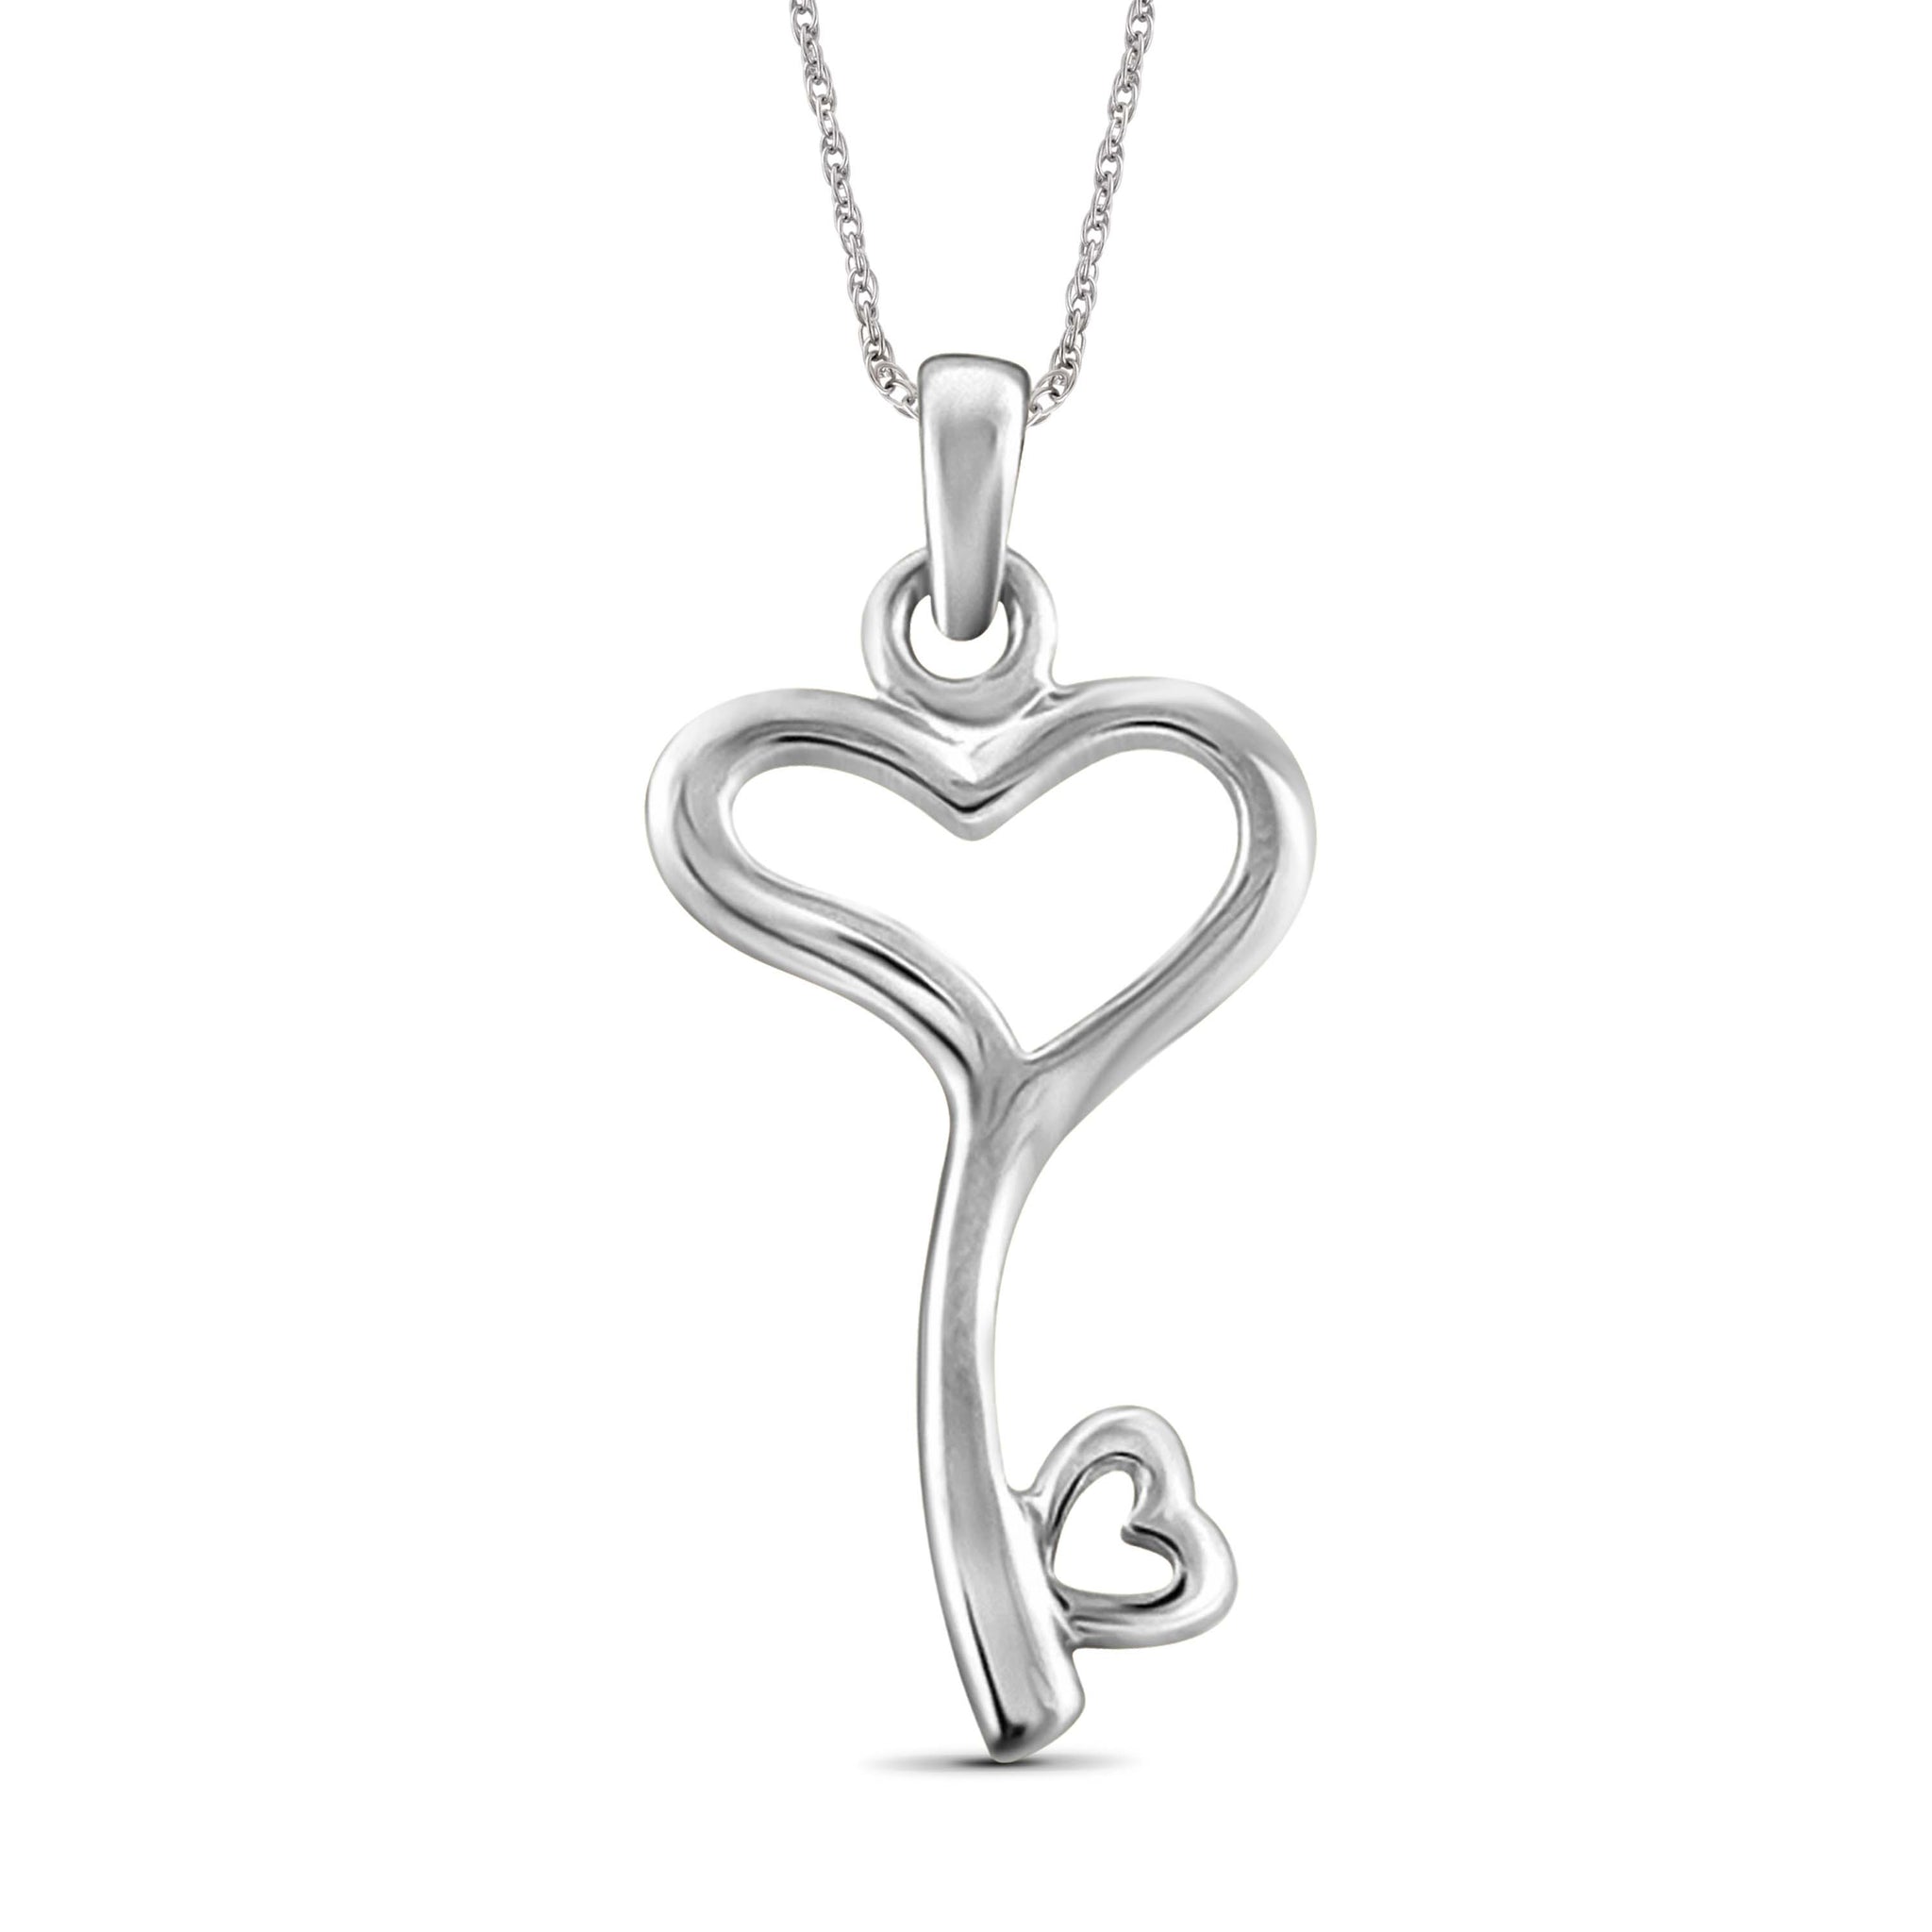 JewelonFire Sterling Silver Heart Key Pendant - Assorted Colors